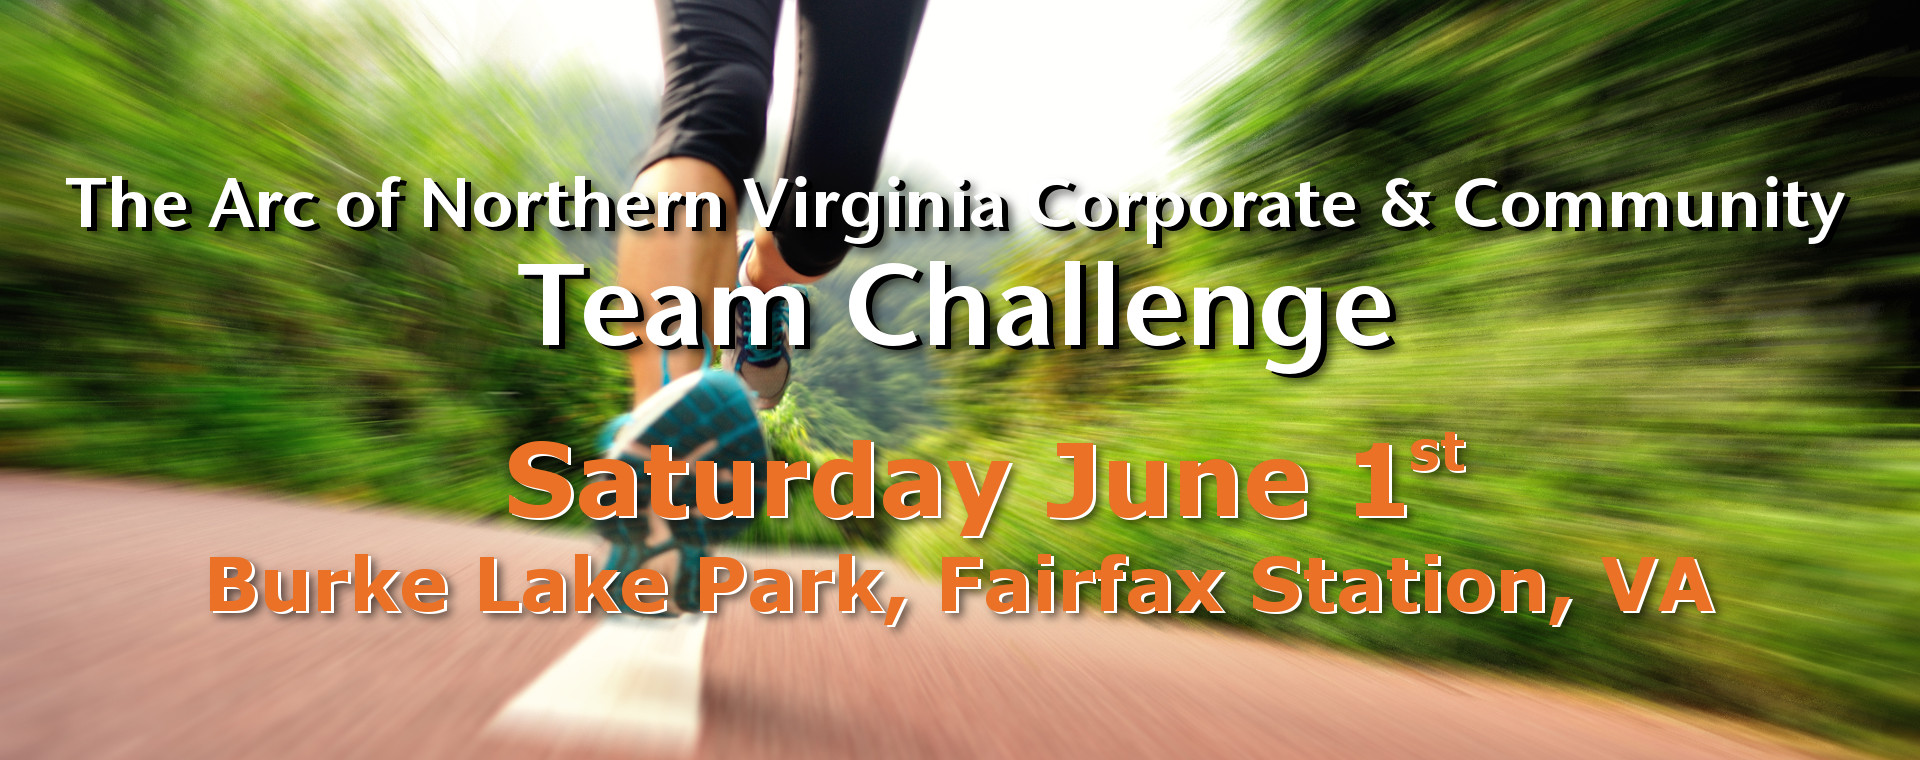 promo image for the 2024 Team Challenge 5k fundraiser on Saturday June 1st, 2024 features a closeup image of a pair of women's legs and shoes running outdoors on an all weather track